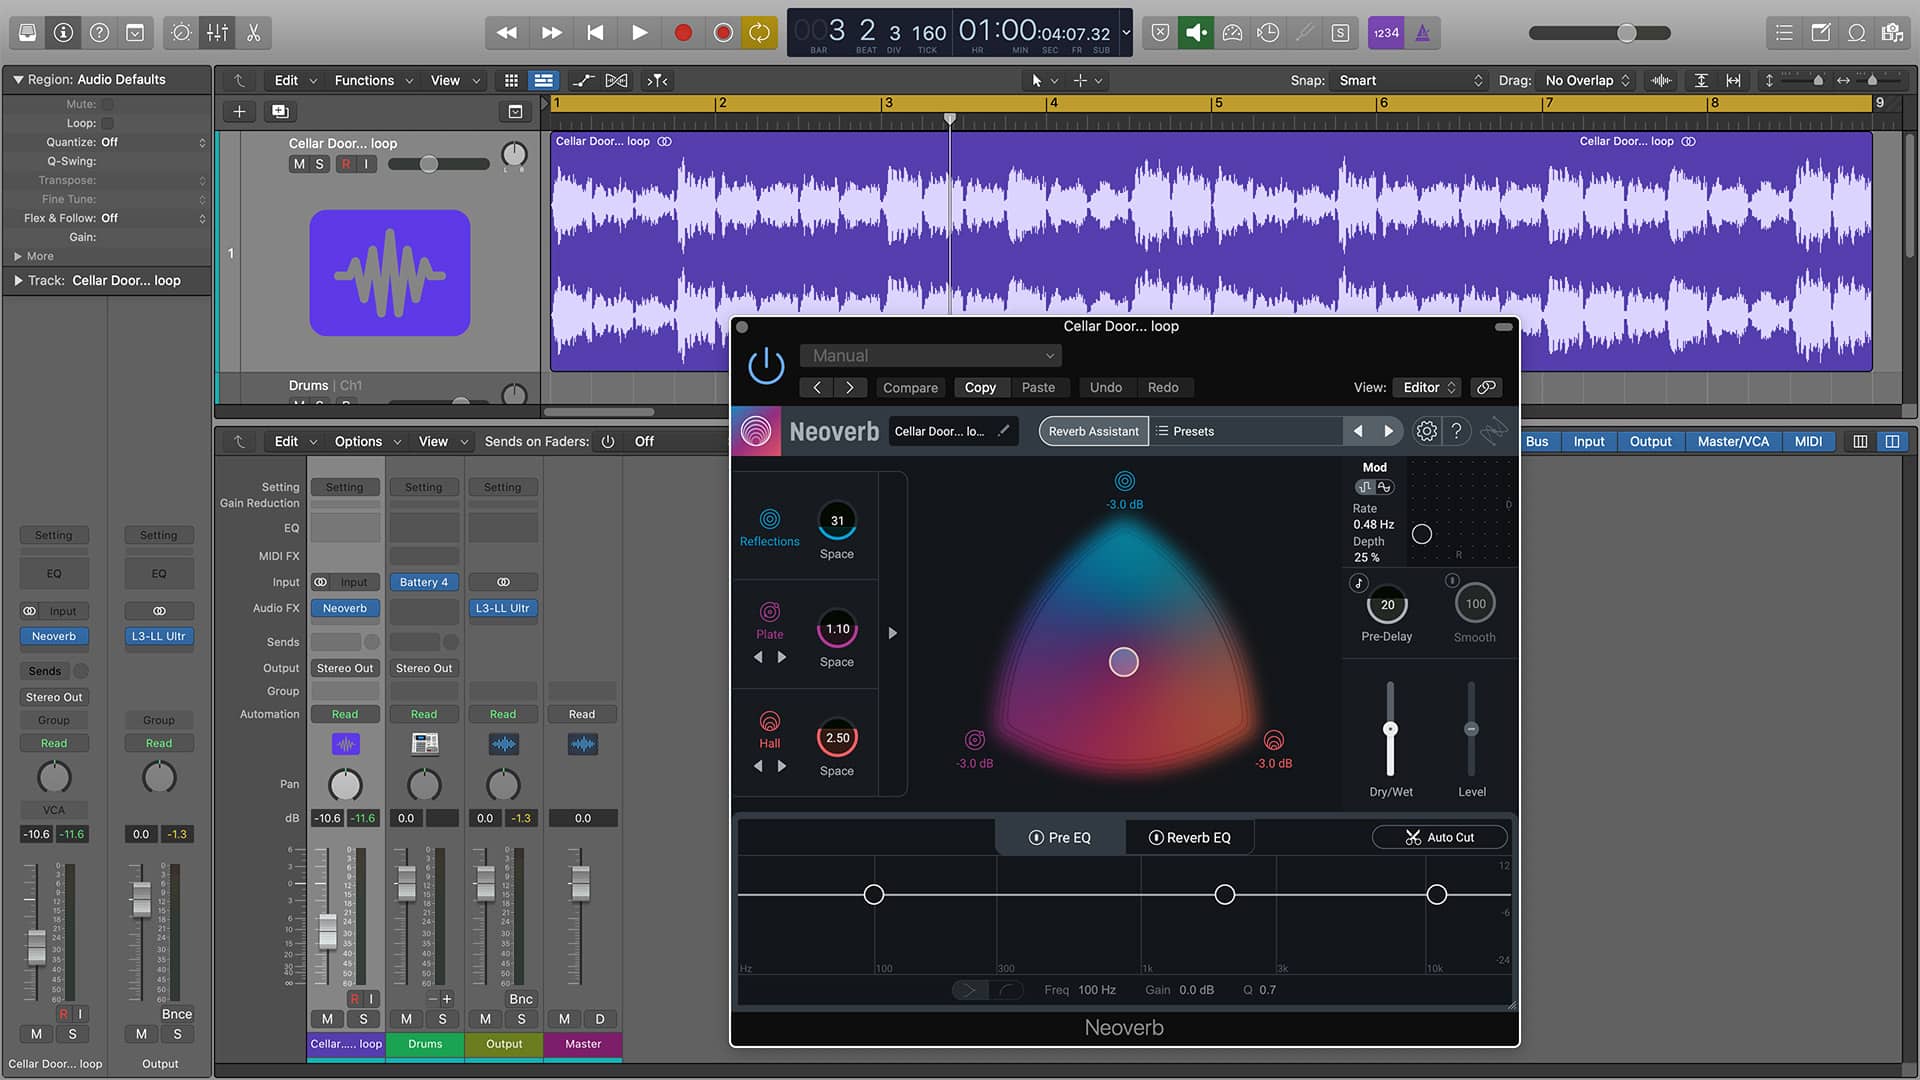 download the new version for ios iZotope Neoverb 1.3.0